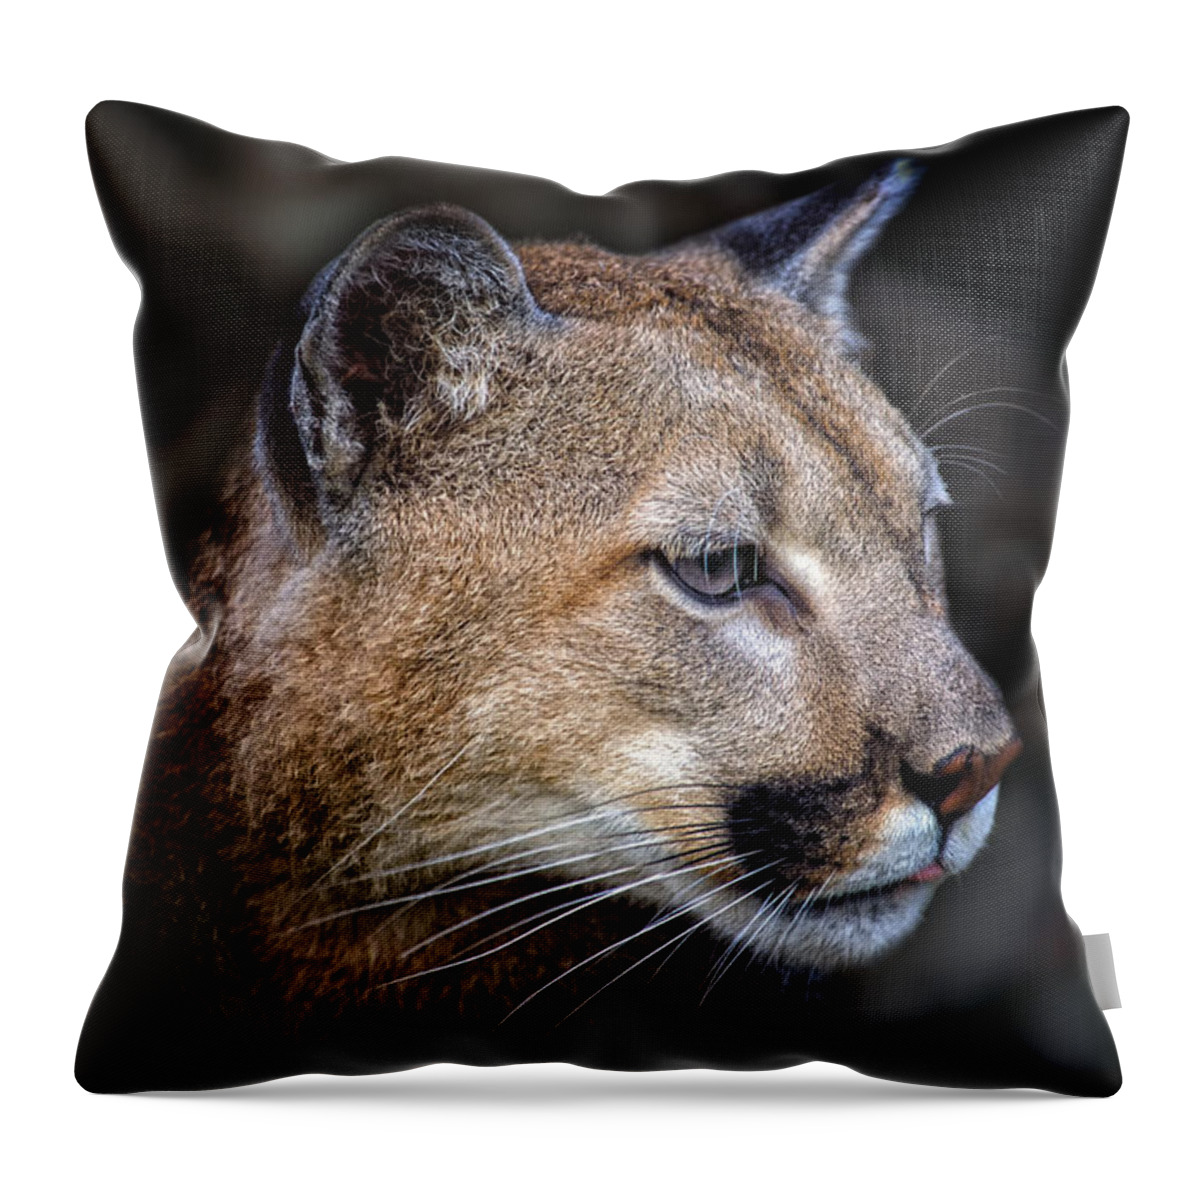 Crystal Yingling Throw Pillow featuring the photograph Totem by Ghostwinds Photography